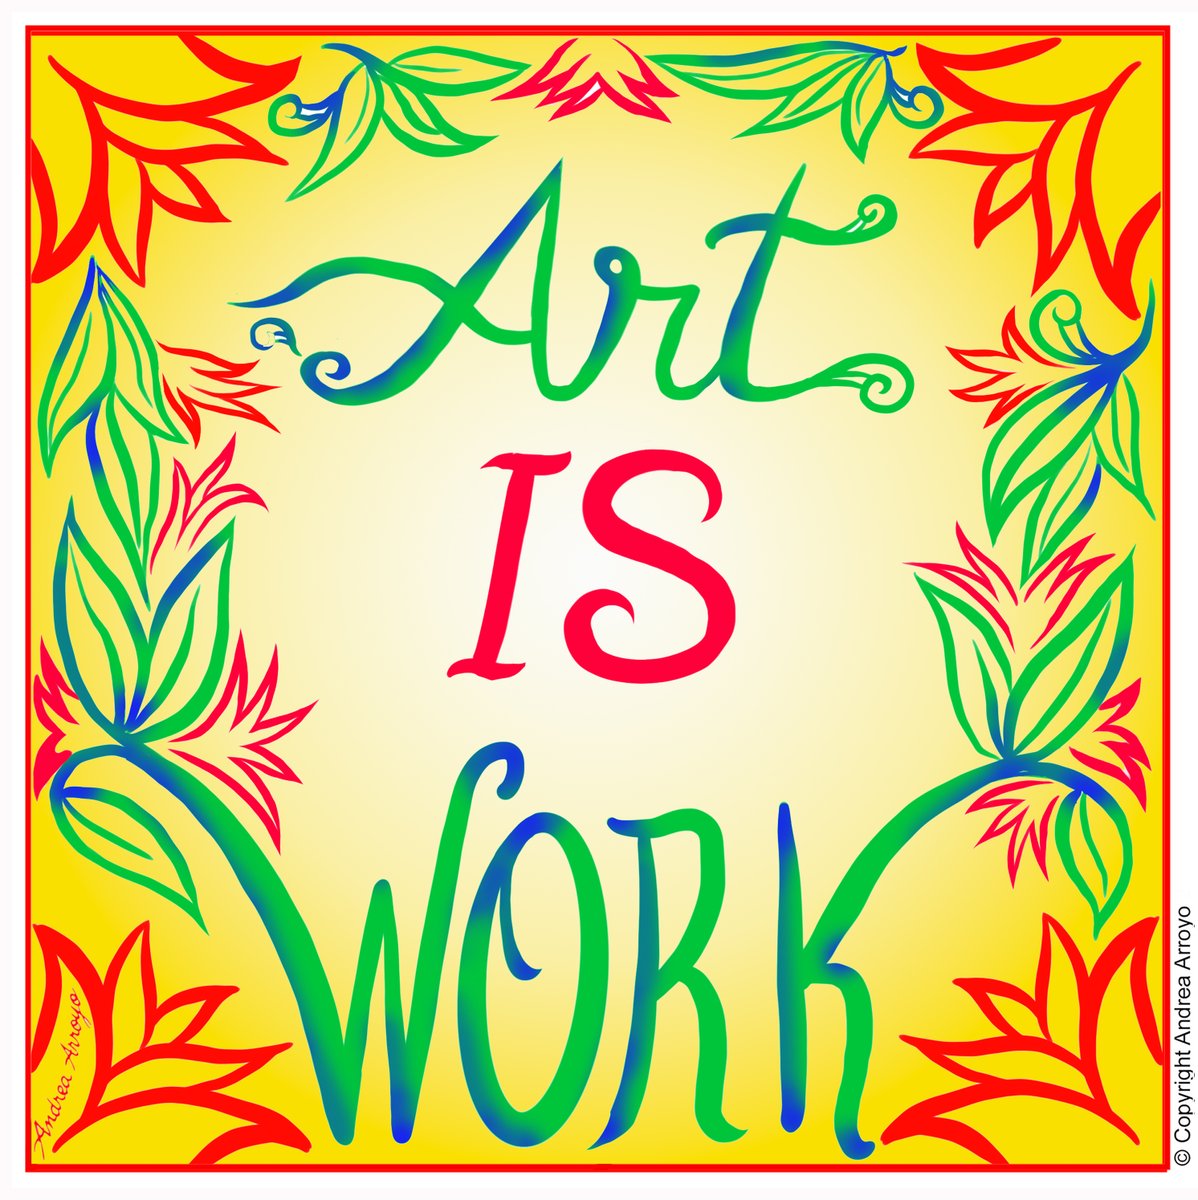 '#ArtISwork' Happy #WorkersDay! Commemorating #workers' struggles & gains. TNX to all artists who create #Artforchange.
Join us for @NYWomensFdn Bkfst 5/8: give.nywf.org/cwb2024 
#CelebrateWomen #CWB2024 #ArtActivism
#AndreaArroyoArt #ArtAsSolidarity #feministartist 
@ArtsCRNY